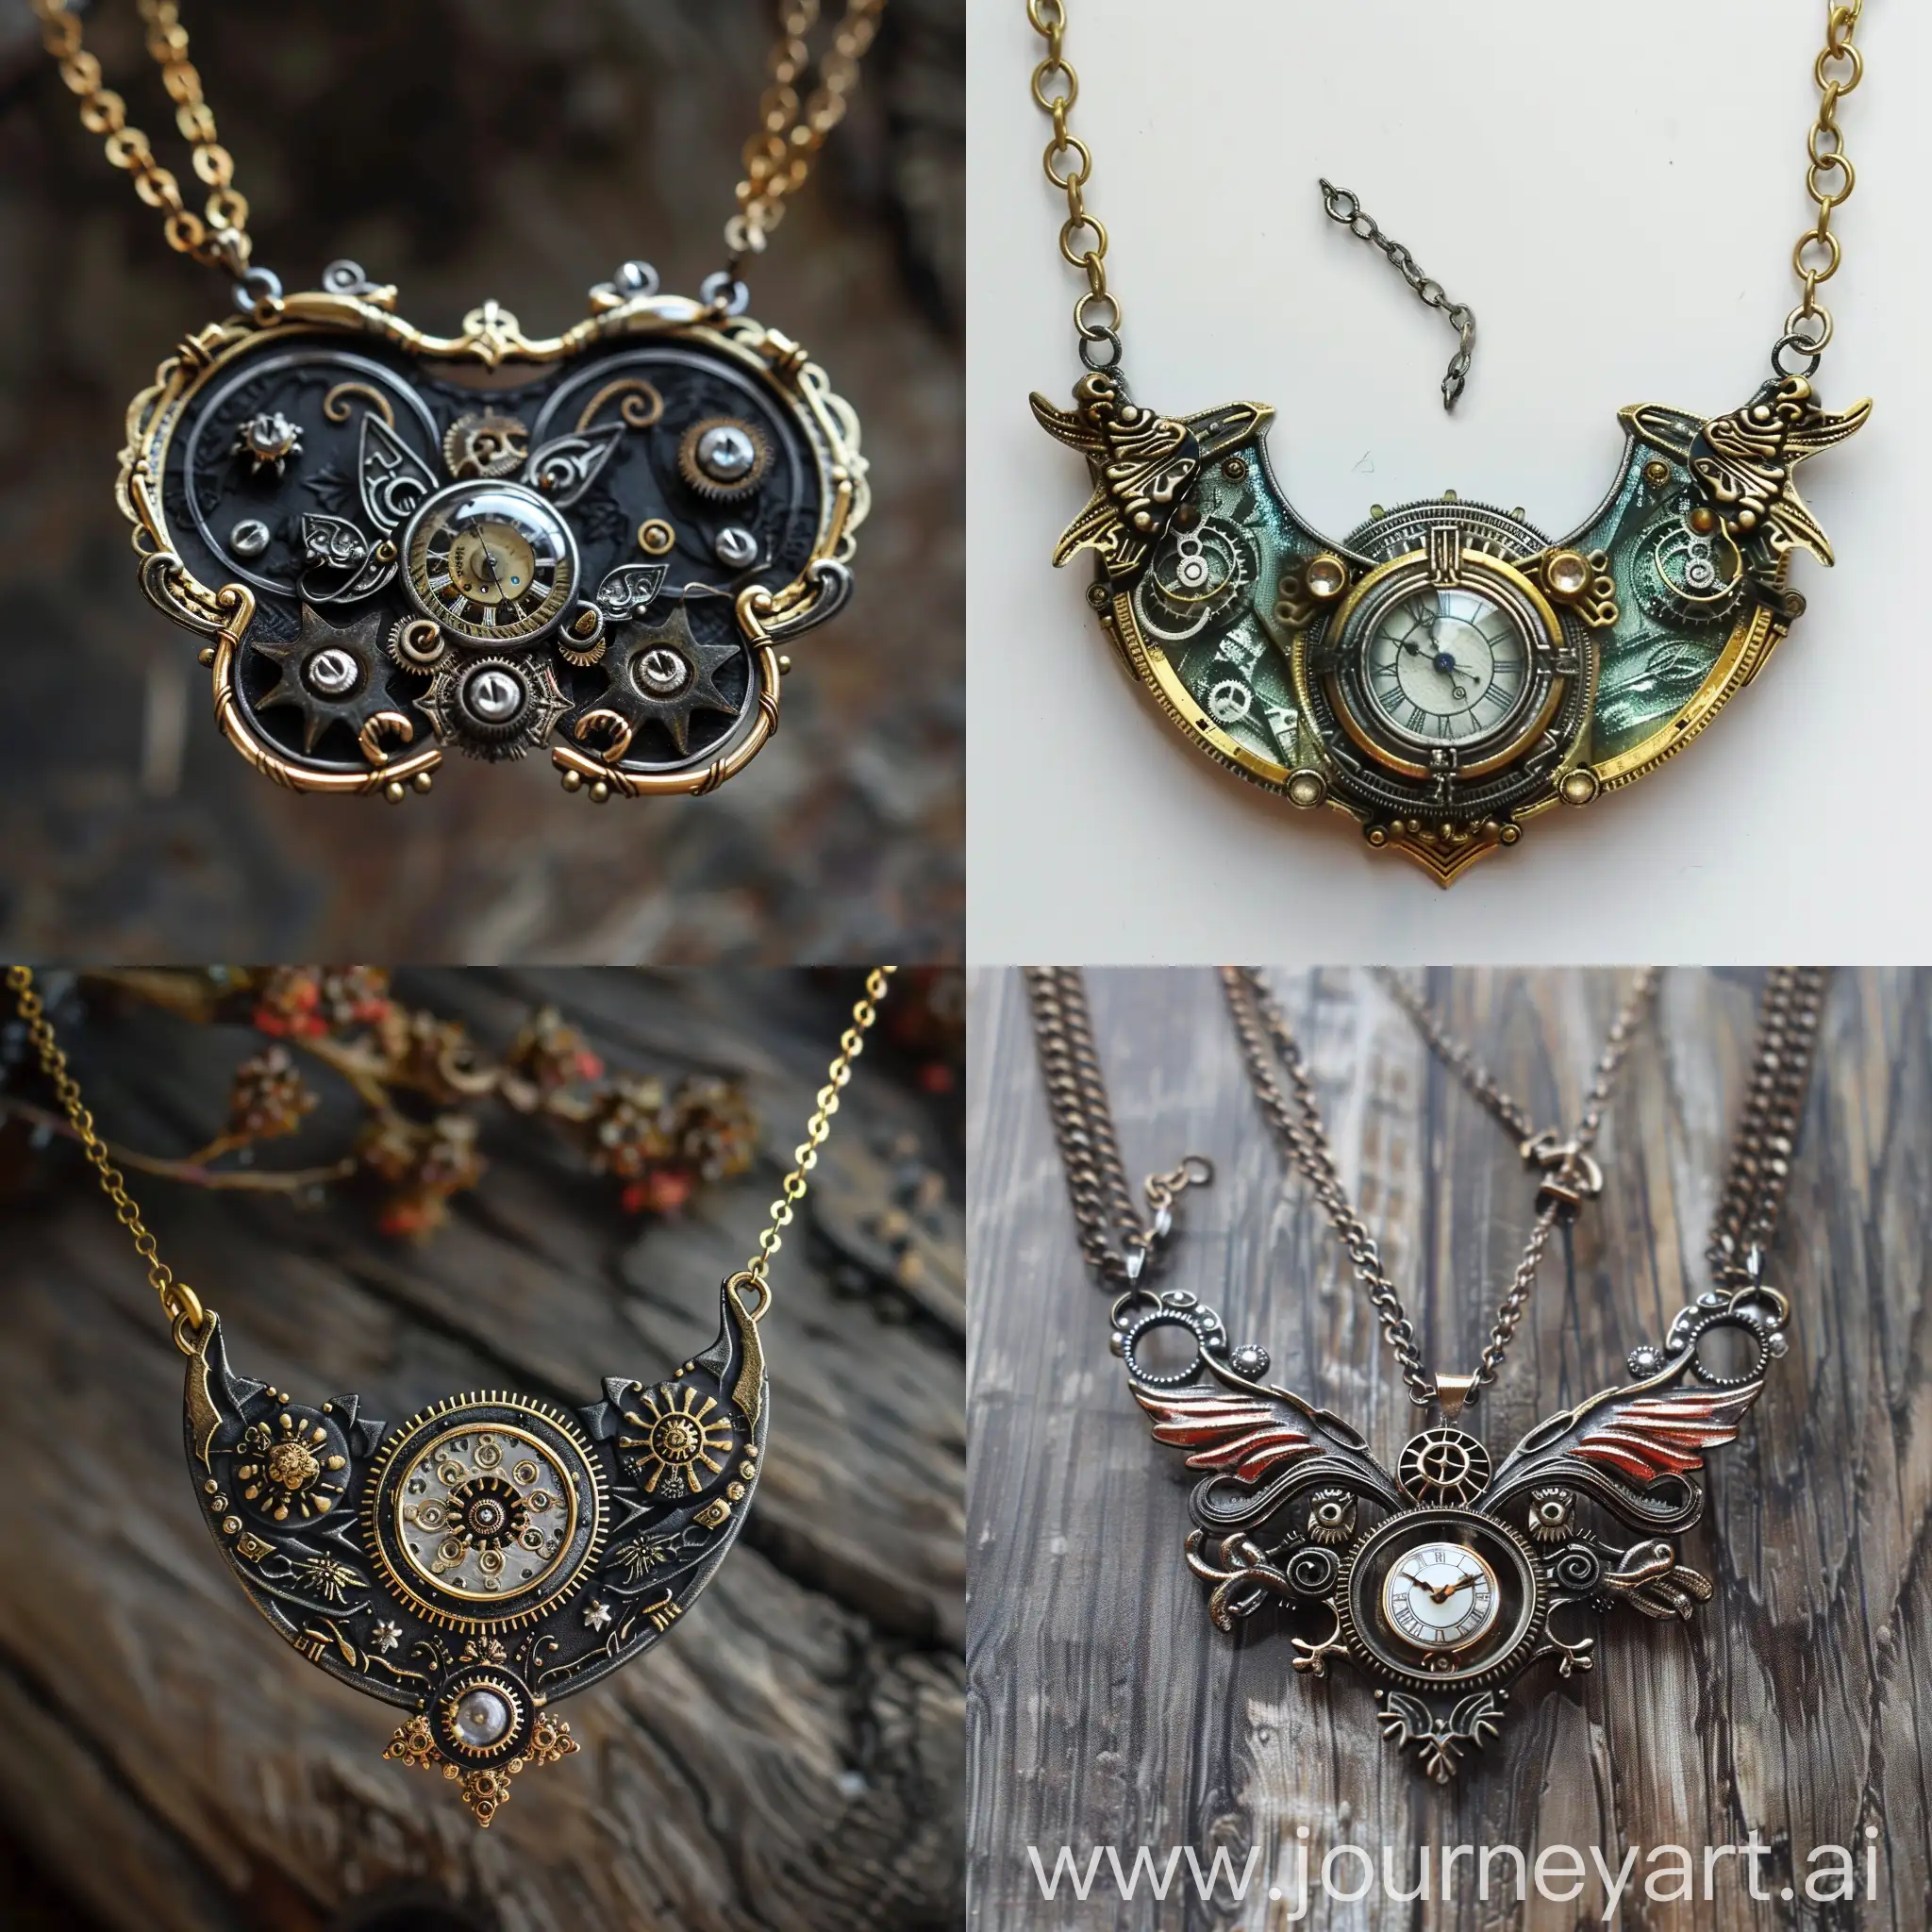 Exquisite-SteampunkInspired-Handmade-Necklace-with-Detailed-Craftsmanship